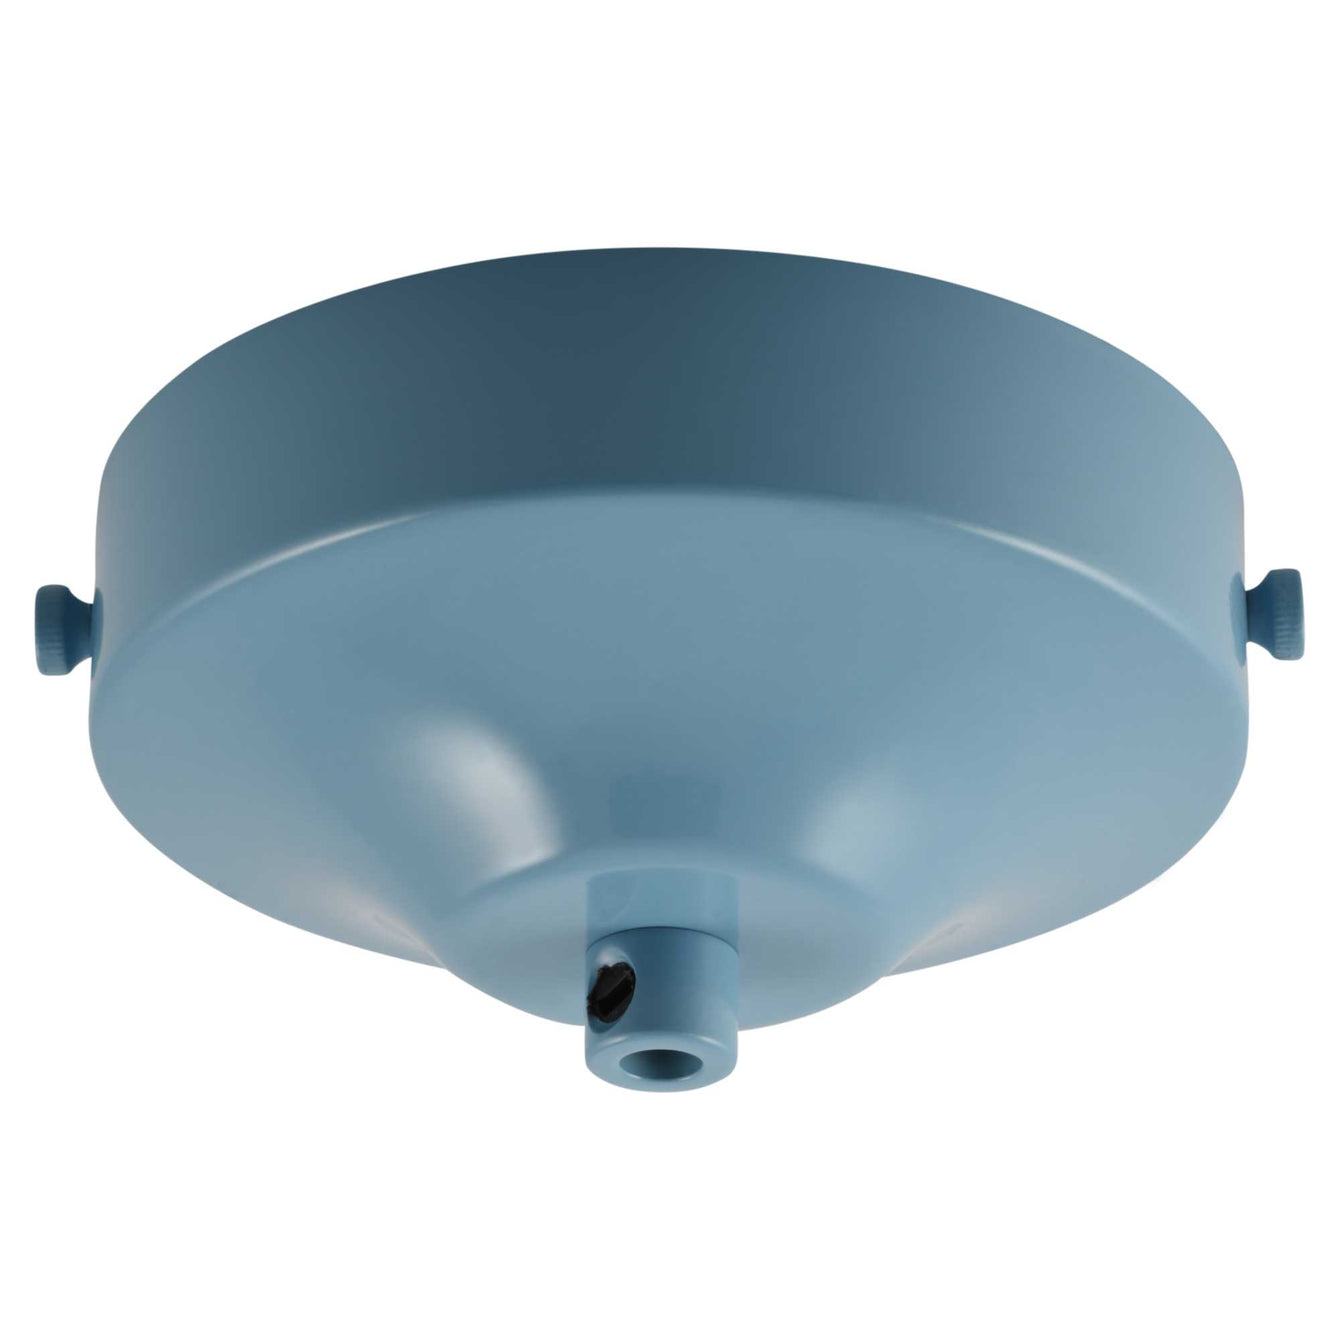 ElekTek 100mm Diameter Convex Ceiling Rose with Strap Bracket and Cord Grip Metallic Finishes Powder Coated Colours - Buy It Better 